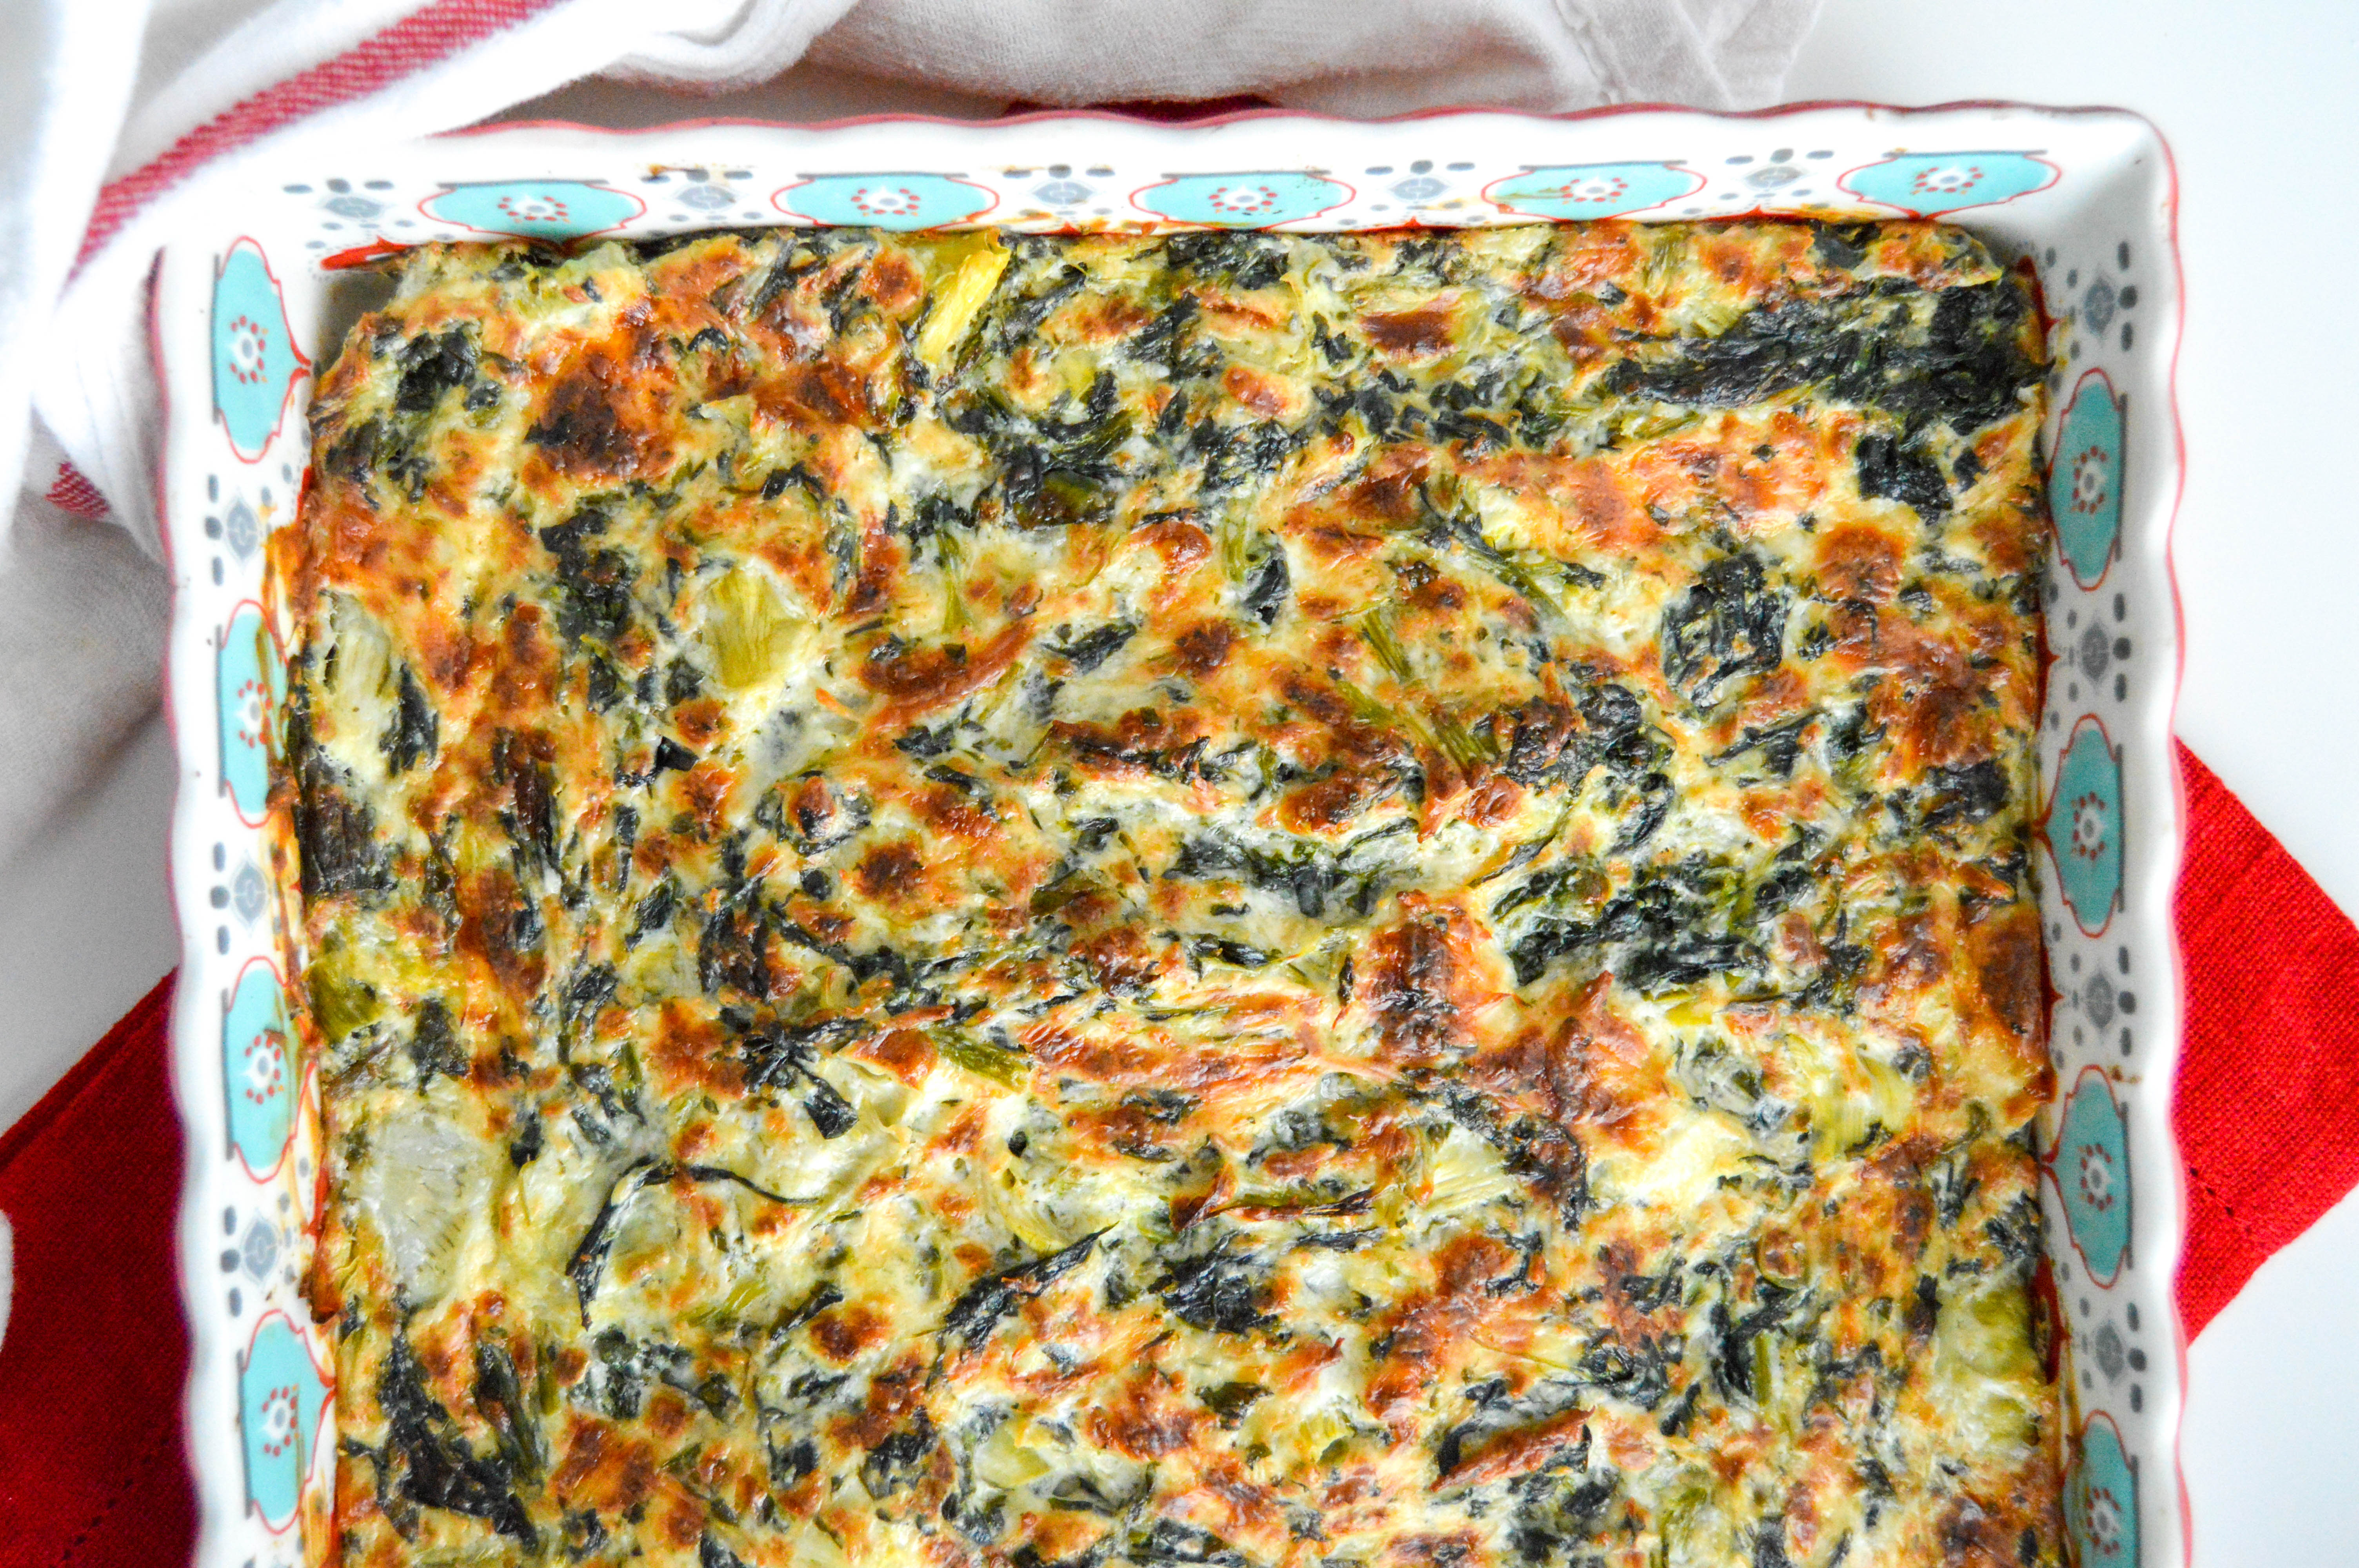 Oven baked cheesy spinach artichoke dip.